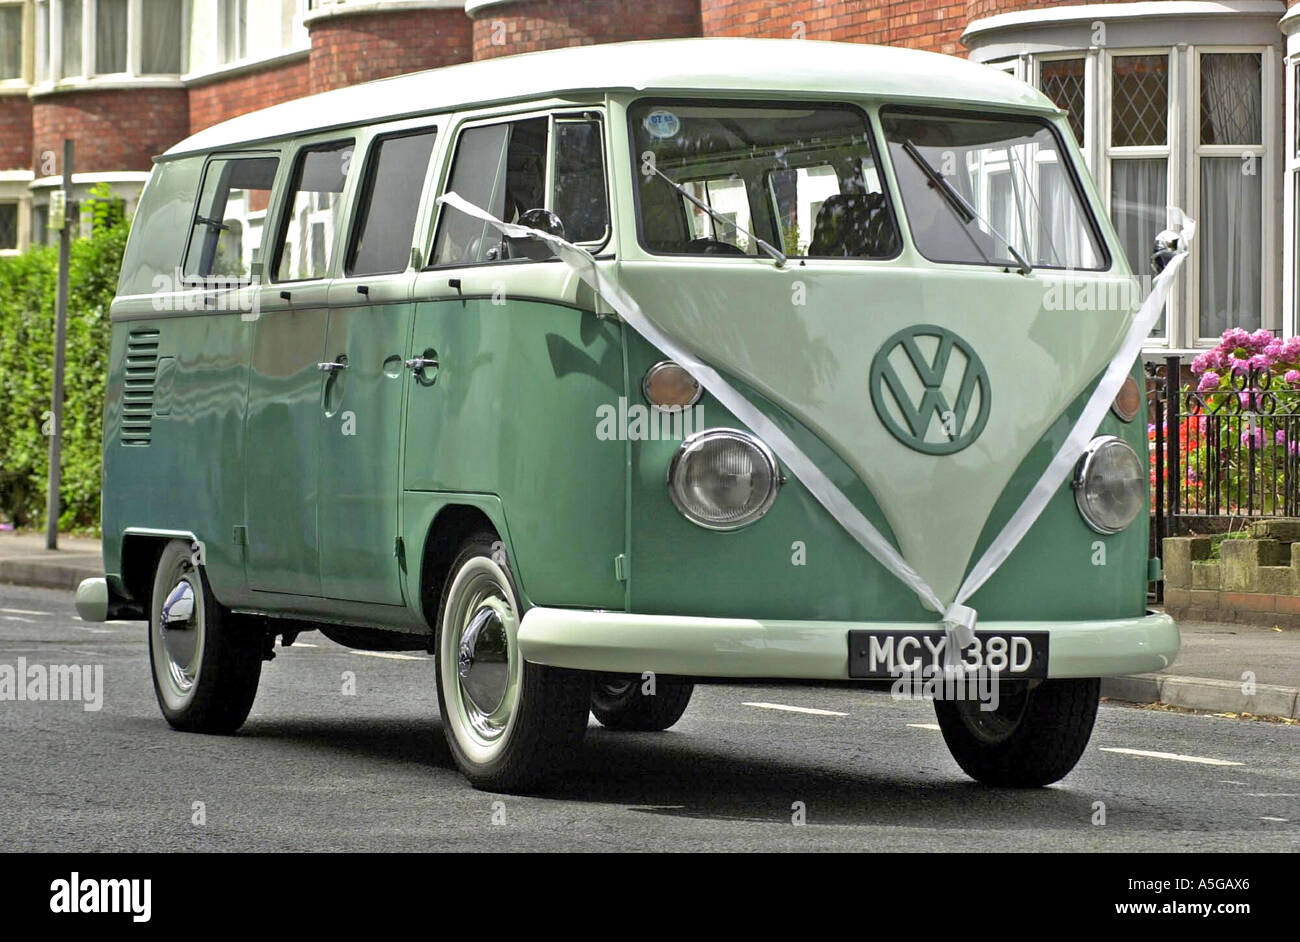 Old Split Screen Volkswagen camper van with bow being used as a wedding  vehicle Stock Photo - Alamy